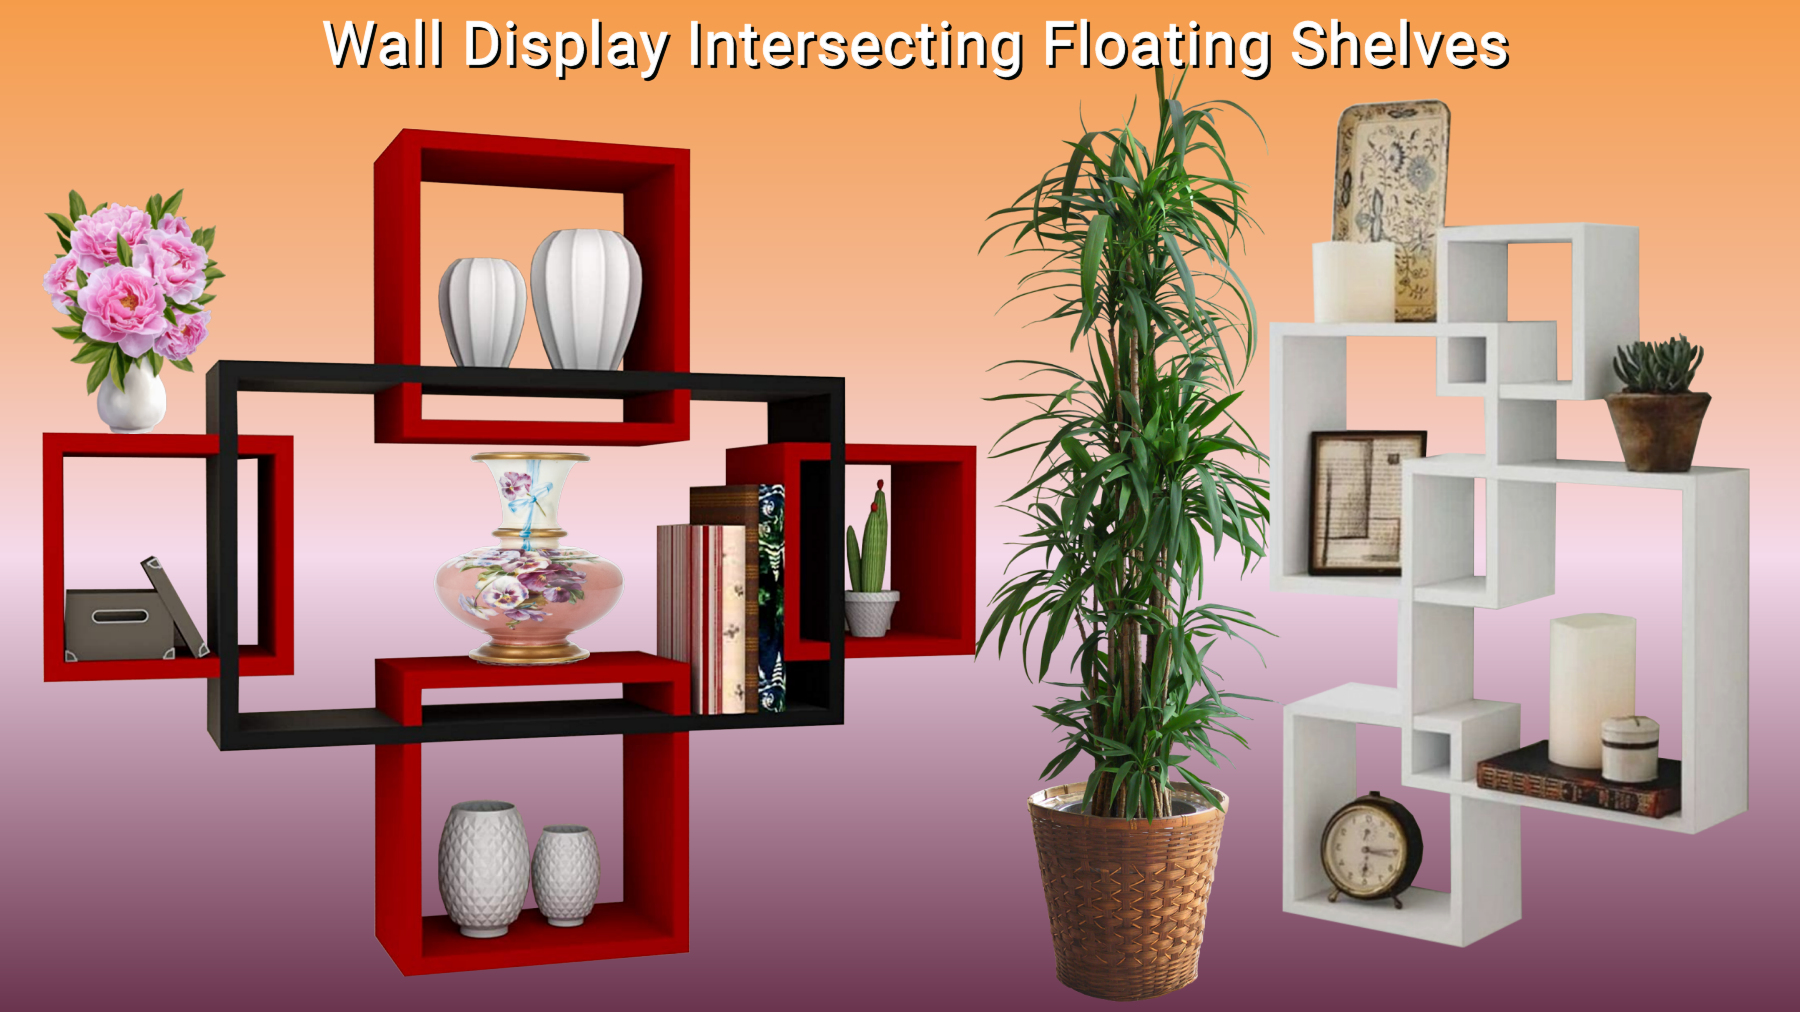 Wall Display Intersecting Floating Shelves